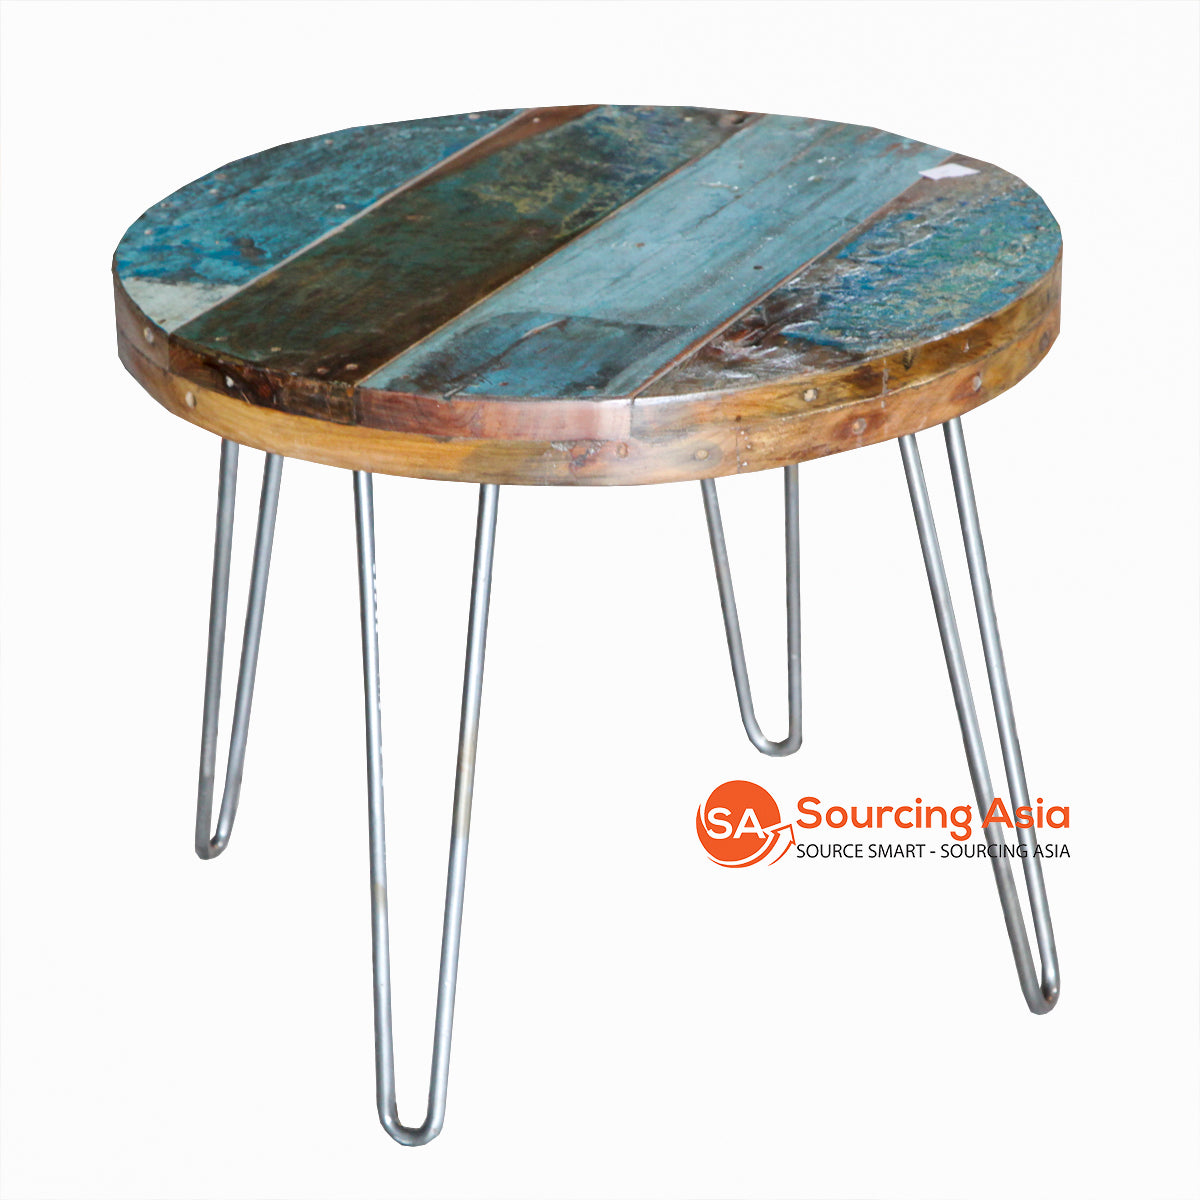 TAR201 RECYCLE TEAK COFFEE TABLE WITH IRON LEGS